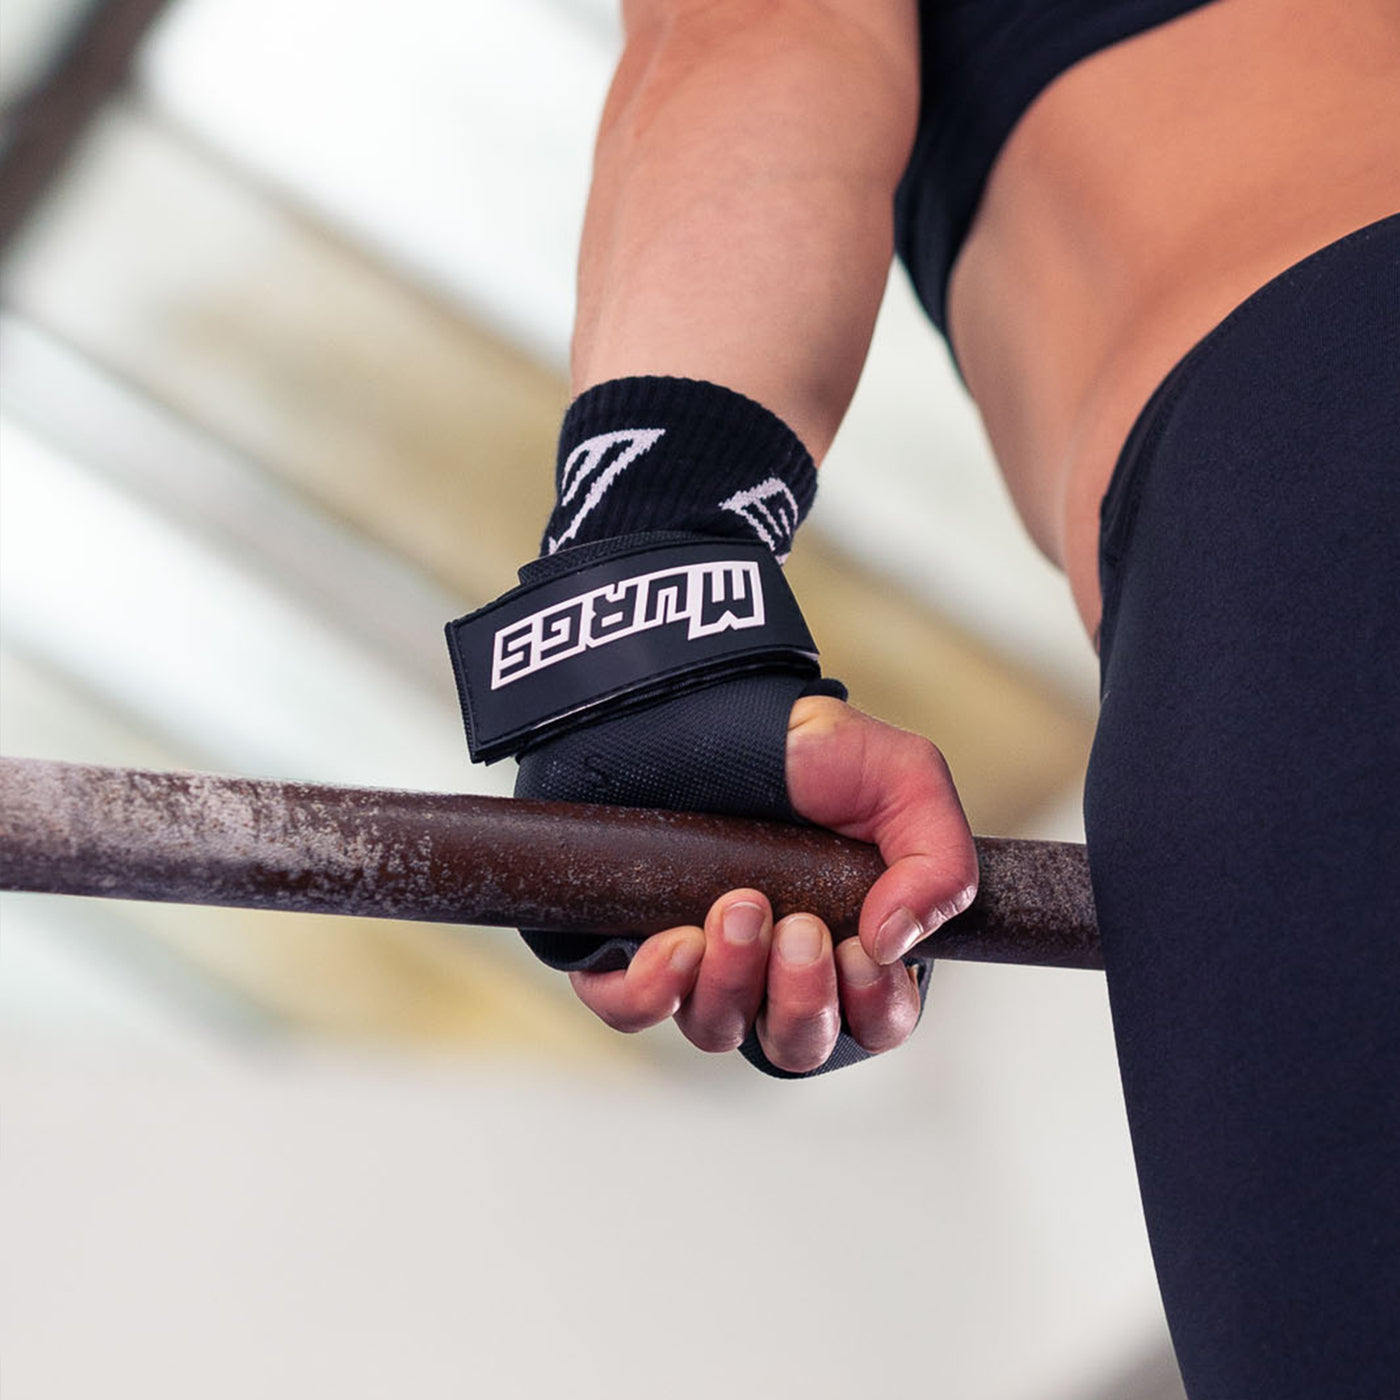 Muscle up in Murgs Crossfit grips